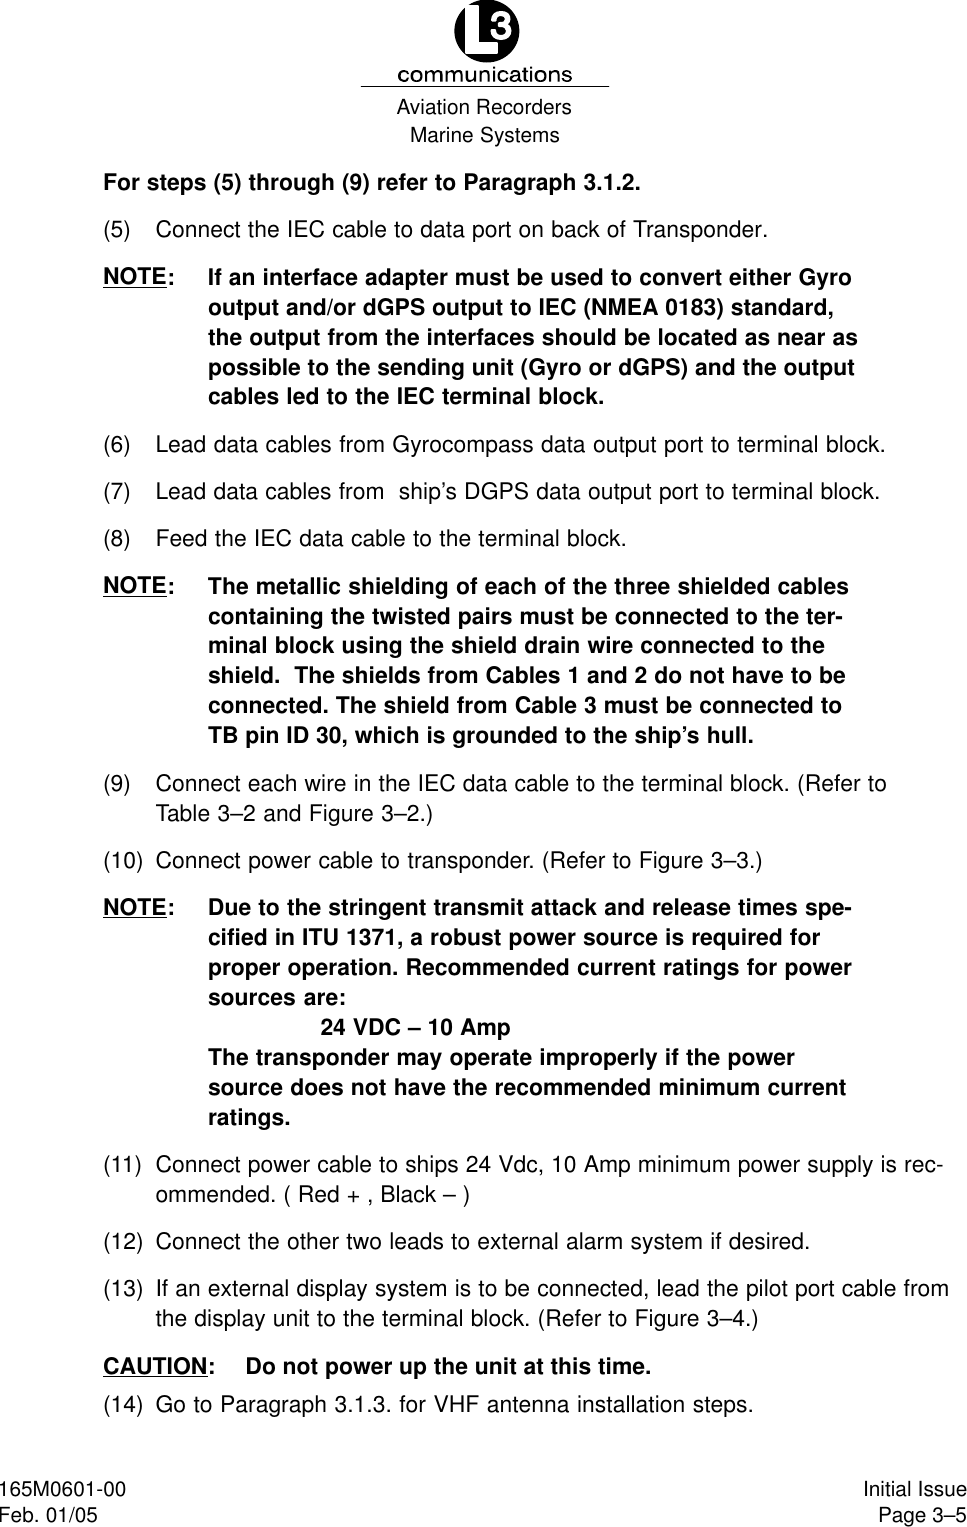 Marine SystemsAviation RecordersPage 3–5Initial Issue165M0601-00Feb. 01/05For steps (5) through (9) refer to Paragraph 3.1.2.(5) Connect the IEC cable to data port on back of Transponder.NOTE: If an interface adapter must be used to convert either Gyrooutput and/or dGPS output to IEC (NMEA 0183) standard,the output from the interfaces should be located as near aspossible to the sending unit (Gyro or dGPS) and the outputcables led to the IEC terminal block.(6) Lead data cables from Gyrocompass data output port to terminal block.(7) Lead data cables from  ship’s DGPS data output port to terminal block.(8) Feed the IEC data cable to the terminal block.NOTE: The metallic shielding of each of the three shielded cablescontaining the twisted pairs must be connected to the ter-minal block using the shield drain wire connected to theshield.  The shields from Cables 1 and 2 do not have to beconnected. The shield from Cable 3 must be connected toTB pin ID 30, which is grounded to the ship’s hull.(9) Connect each wire in the IEC data cable to the terminal block. (Refer toTable 3–2 and Figure 3–2.)(10) Connect power cable to transponder. (Refer to Figure 3–3.)NOTE: Due to the stringent transmit attack and release times spe-cified in ITU 1371, a robust power source is required forproper operation. Recommended current ratings for powersources are:24 VDC – 10 AmpThe transponder may operate improperly if the powersource does not have the recommended minimum currentratings.(11) Connect power cable to ships 24 Vdc, 10 Amp minimum power supply is rec-ommended. ( Red + , Black – )(12) Connect the other two leads to external alarm system if desired.(13) If an external display system is to be connected, lead the pilot port cable fromthe display unit to the terminal block. (Refer to Figure 3–4.)CAUTION: Do not power up the unit at this time.(14) Go to Paragraph 3.1.3. for VHF antenna installation steps.